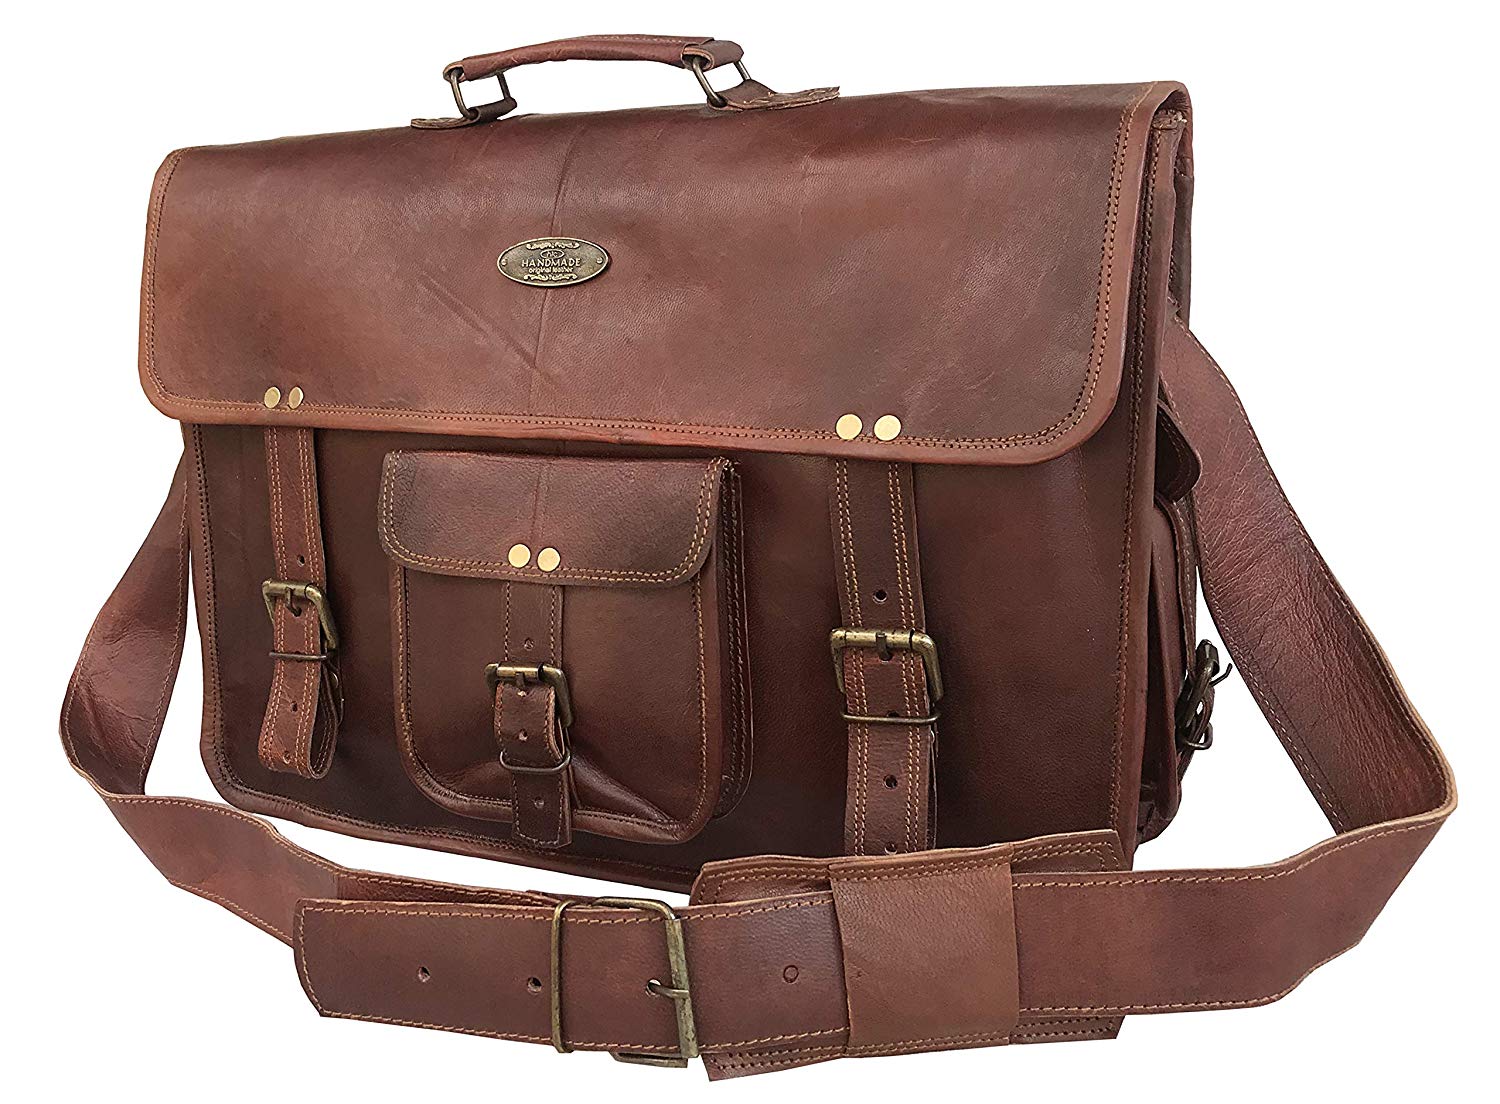 Rugged Leather Messenger Bag - Rugged Leather Laptop Bag -Cuero Bags ...